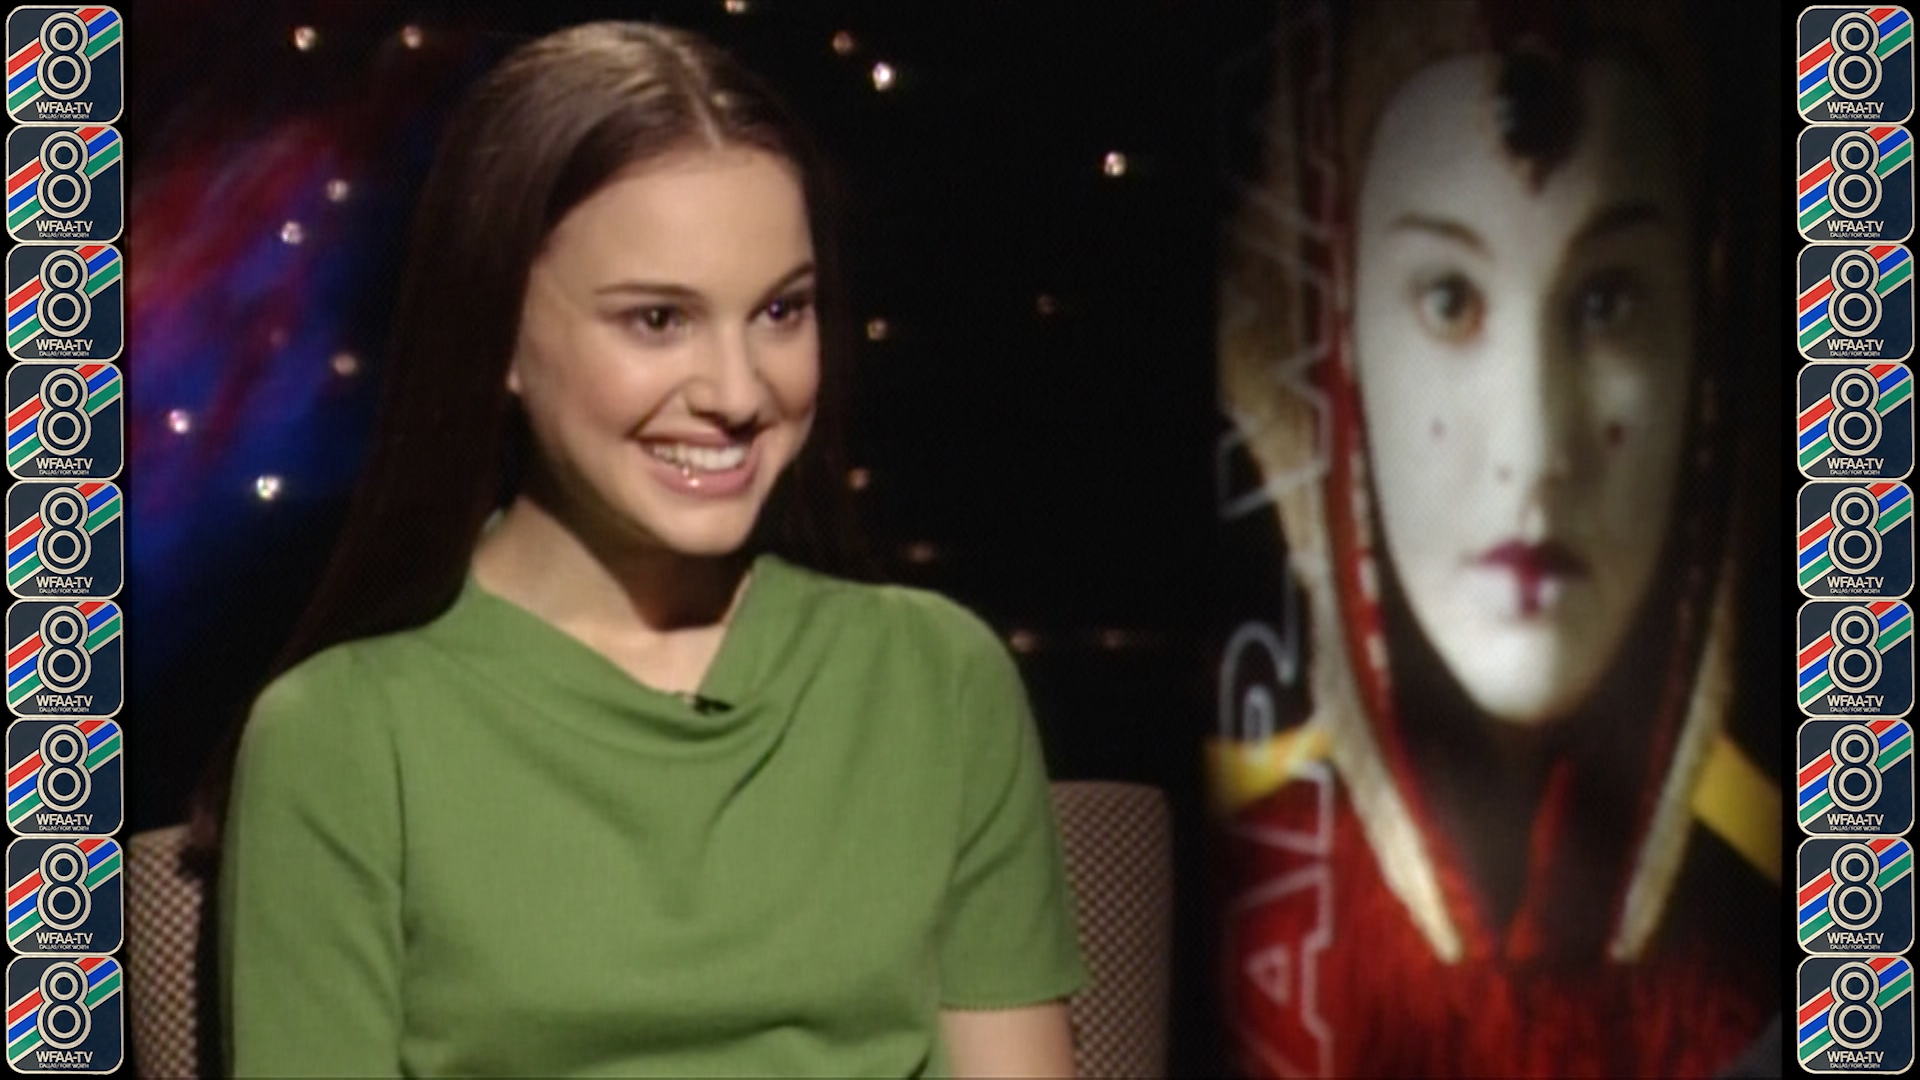 Natalie Portman sat down with WFAA to talk about taking on the role of Padmé Amidala in the 1999 film Star Wars: Episode I - The Phantom Menace.